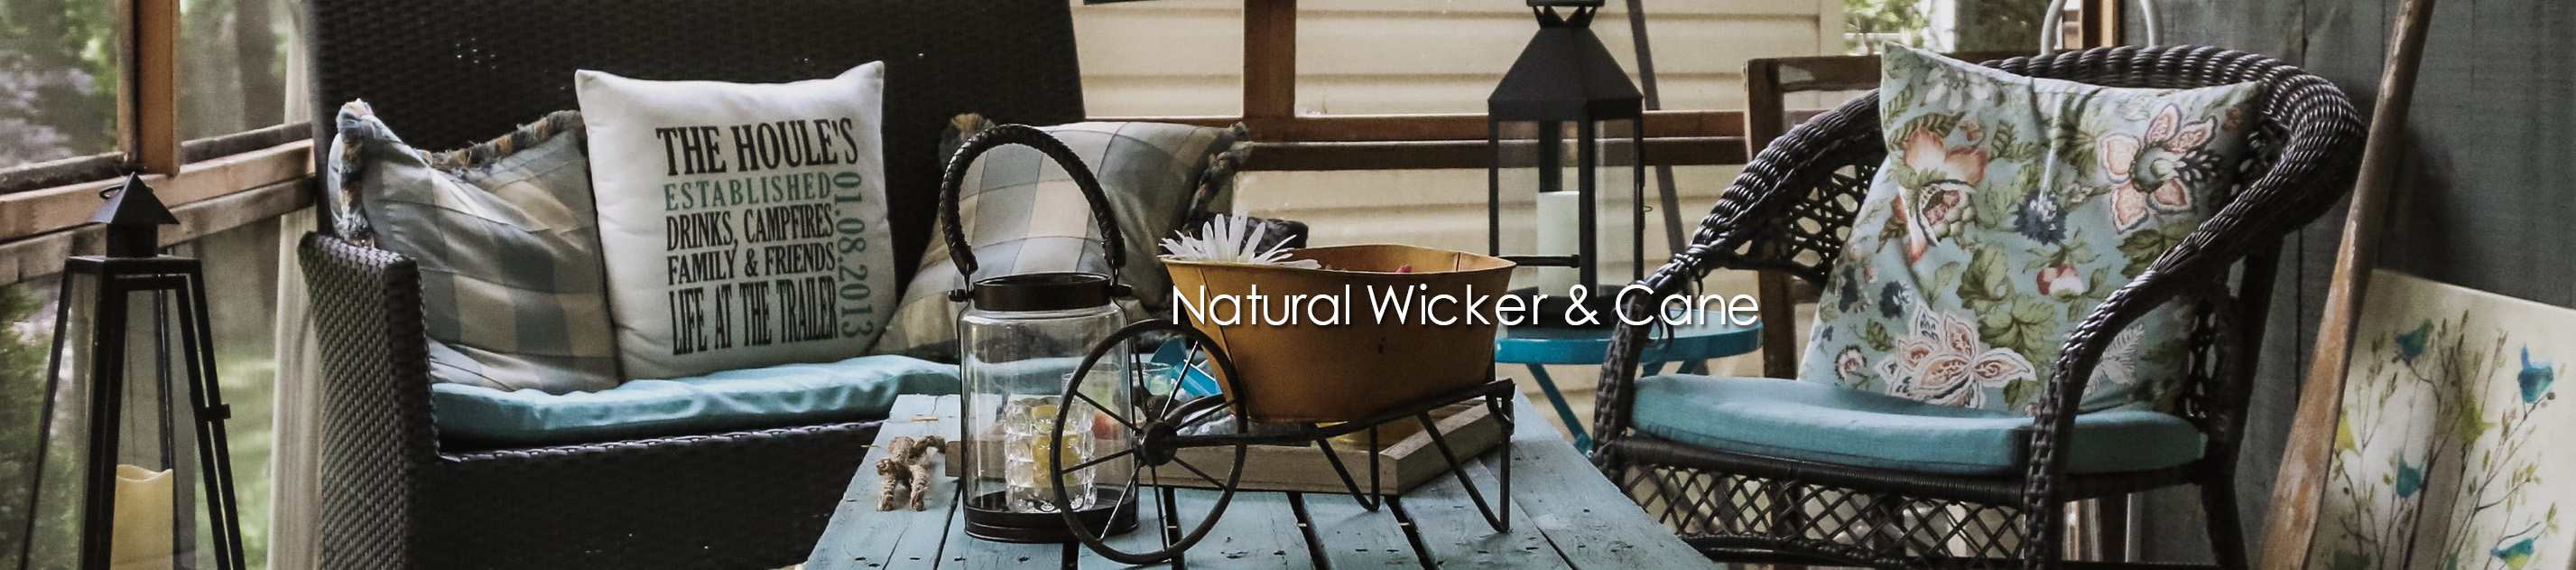 Natural Wicker & Cane